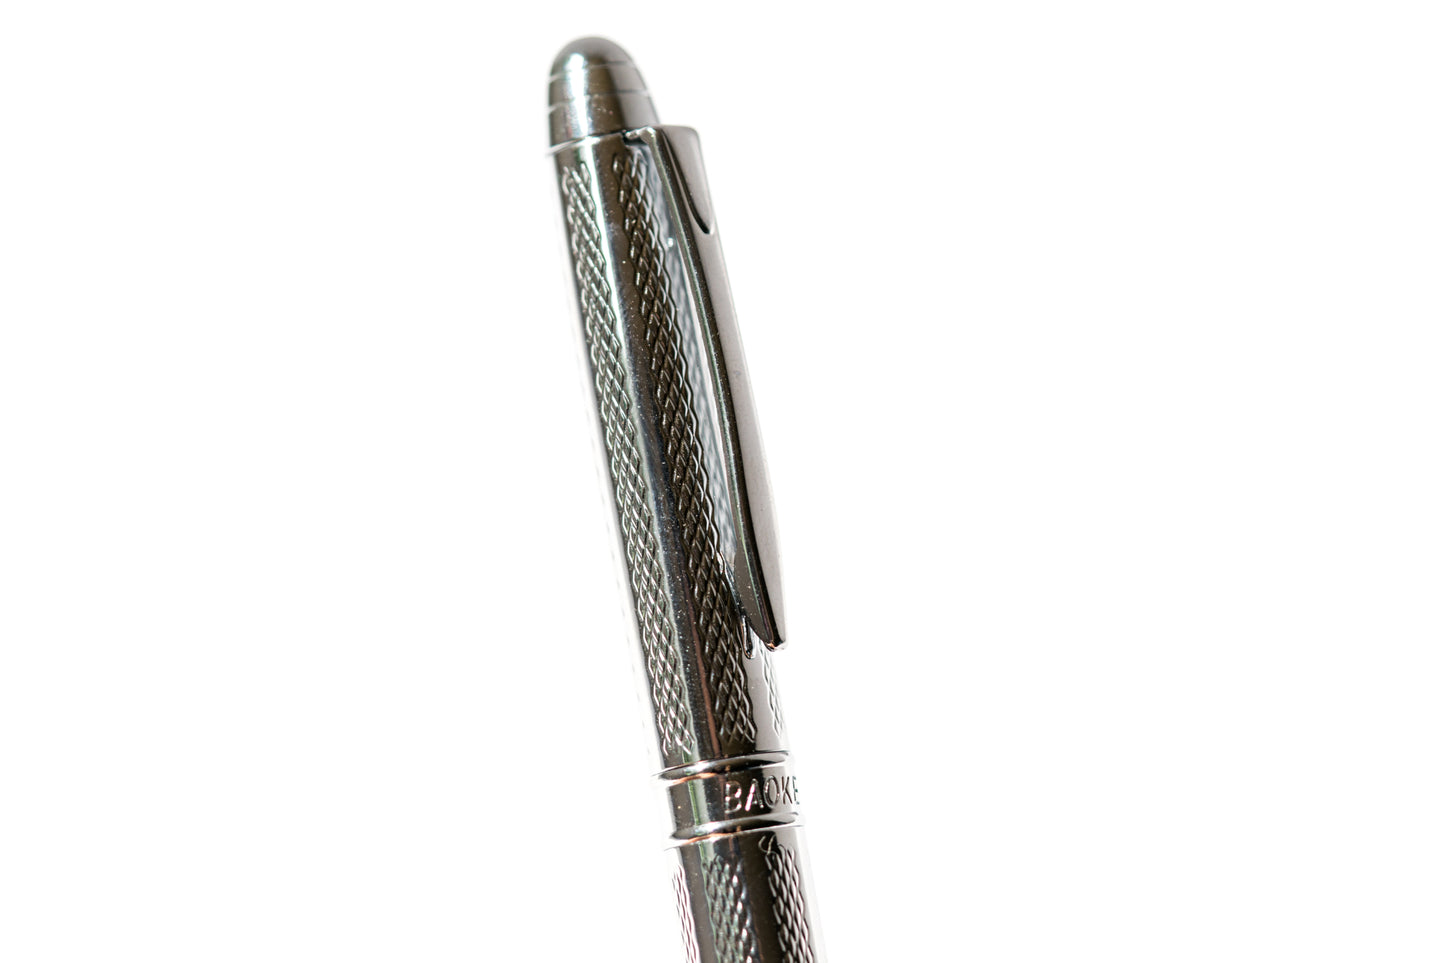 The King's Court  - Silver Stainless Steel Fountain Pen